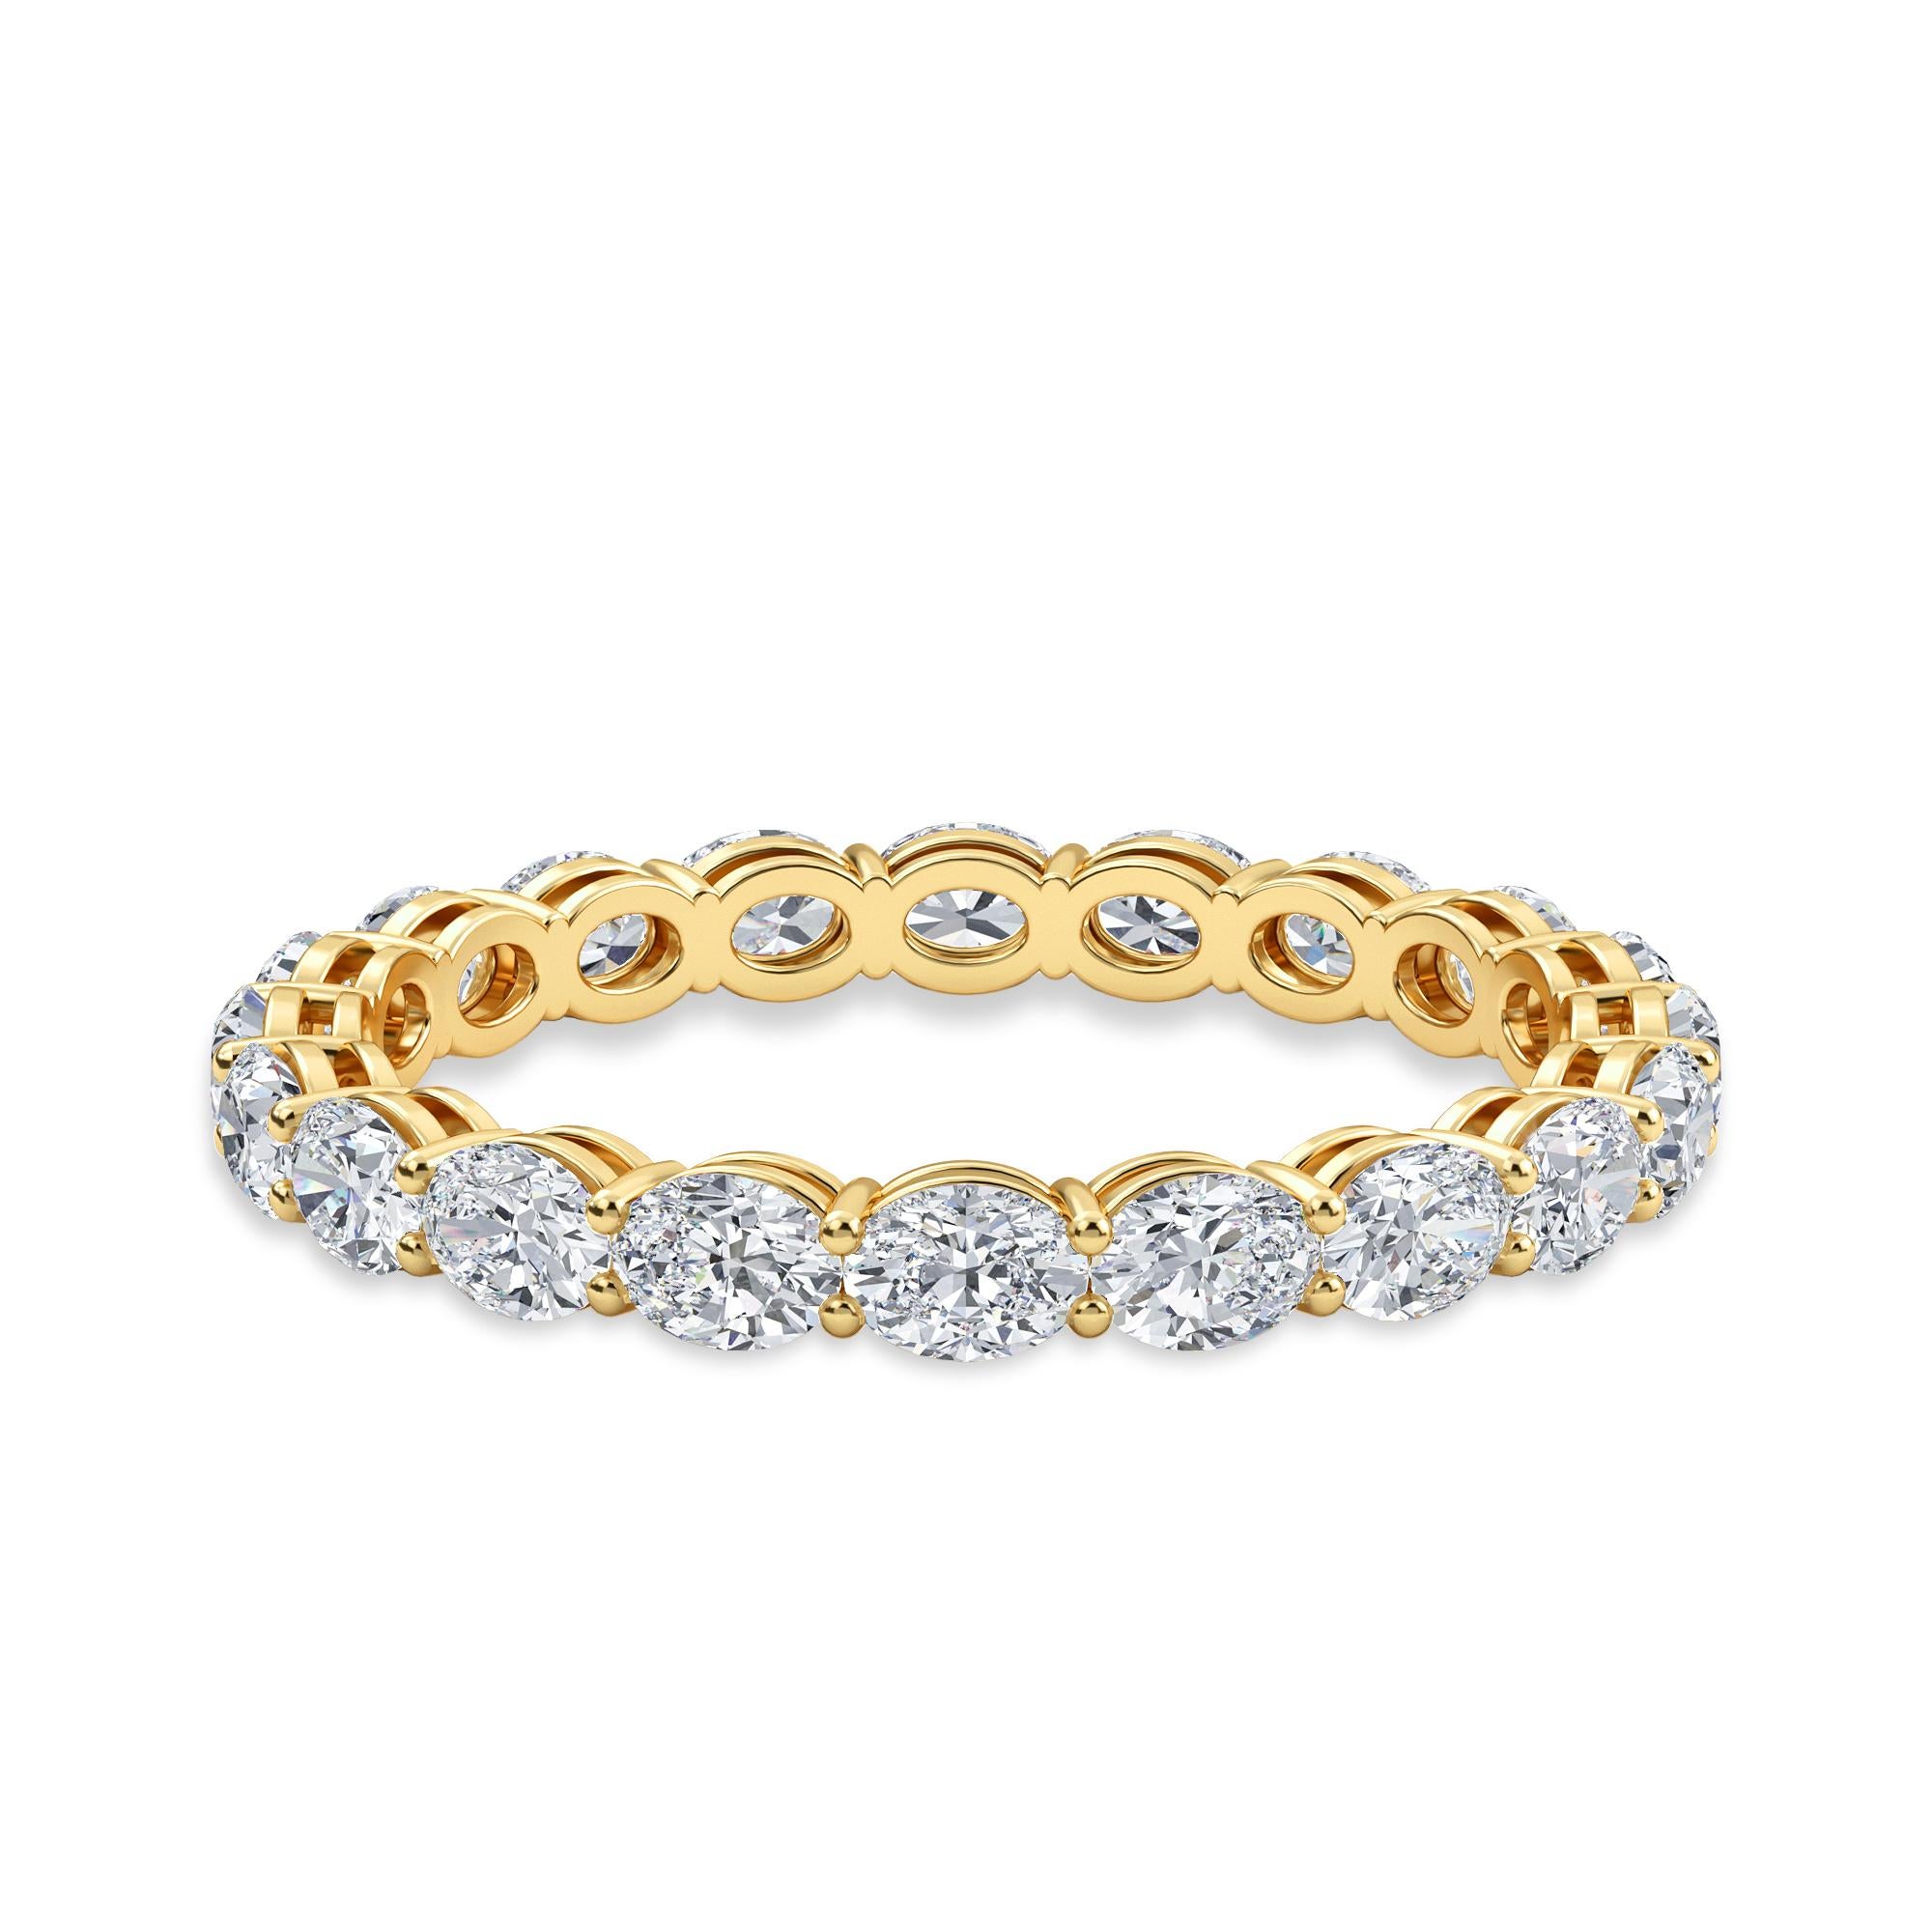 This Oval Diamond Eternity Band has 20 Diamonds, set Horizontal.
The Diamonds have a Total Carat Weight of 1.45.
The Diamonds are F color, VS clarity.
The ring is a finger size 6.25 and is set in 18k Yellow.